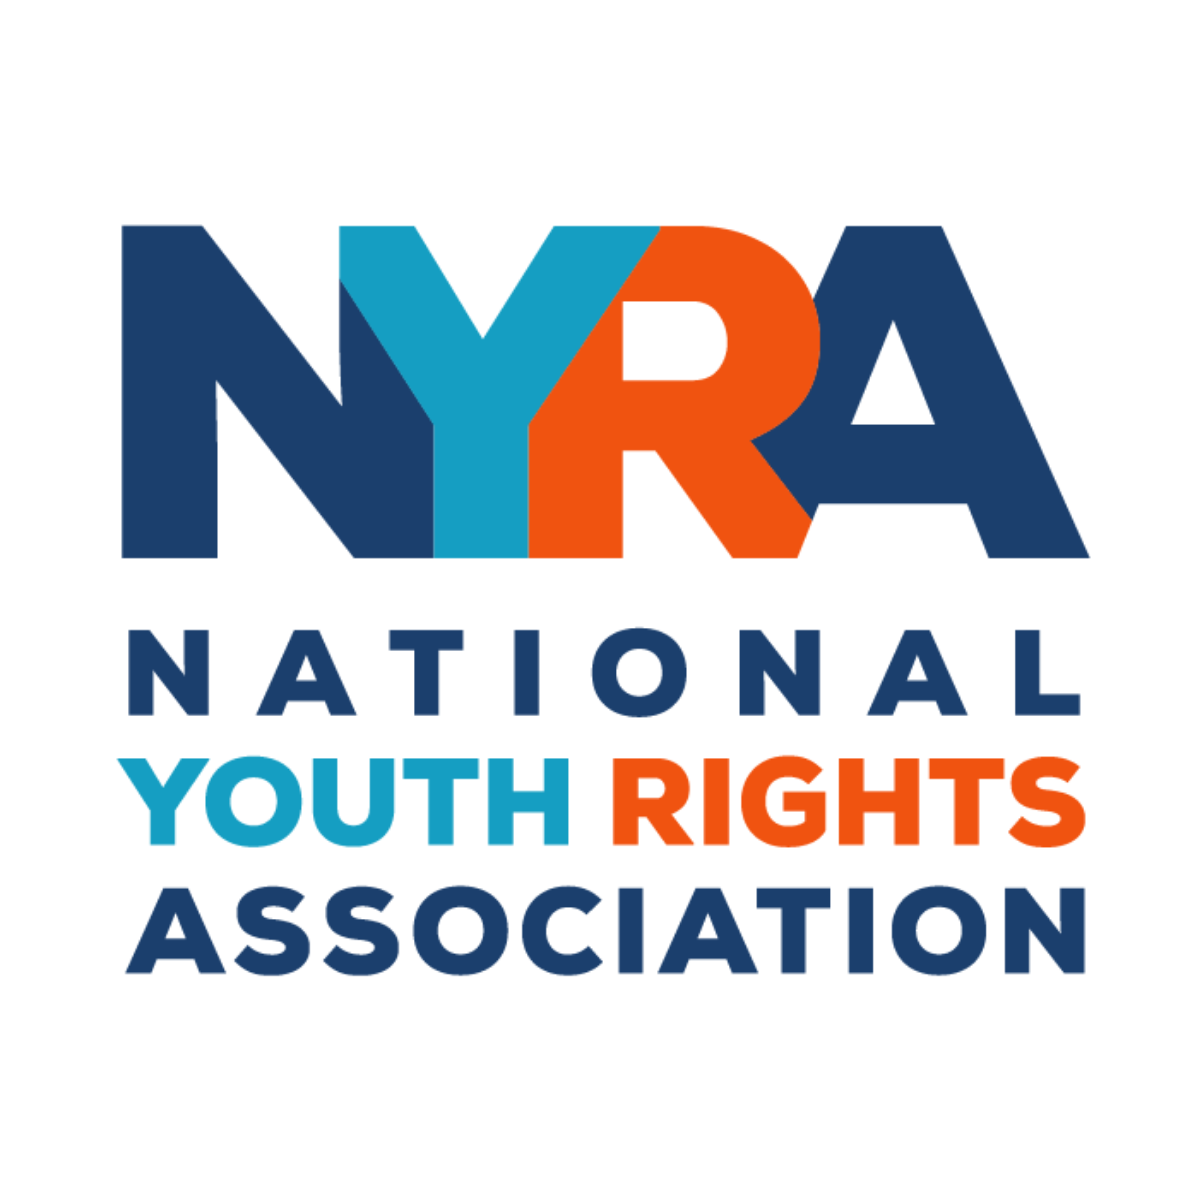 Rights org. Youth rights. Логотип ныра. Topfree equal rights Association. NFA logo.